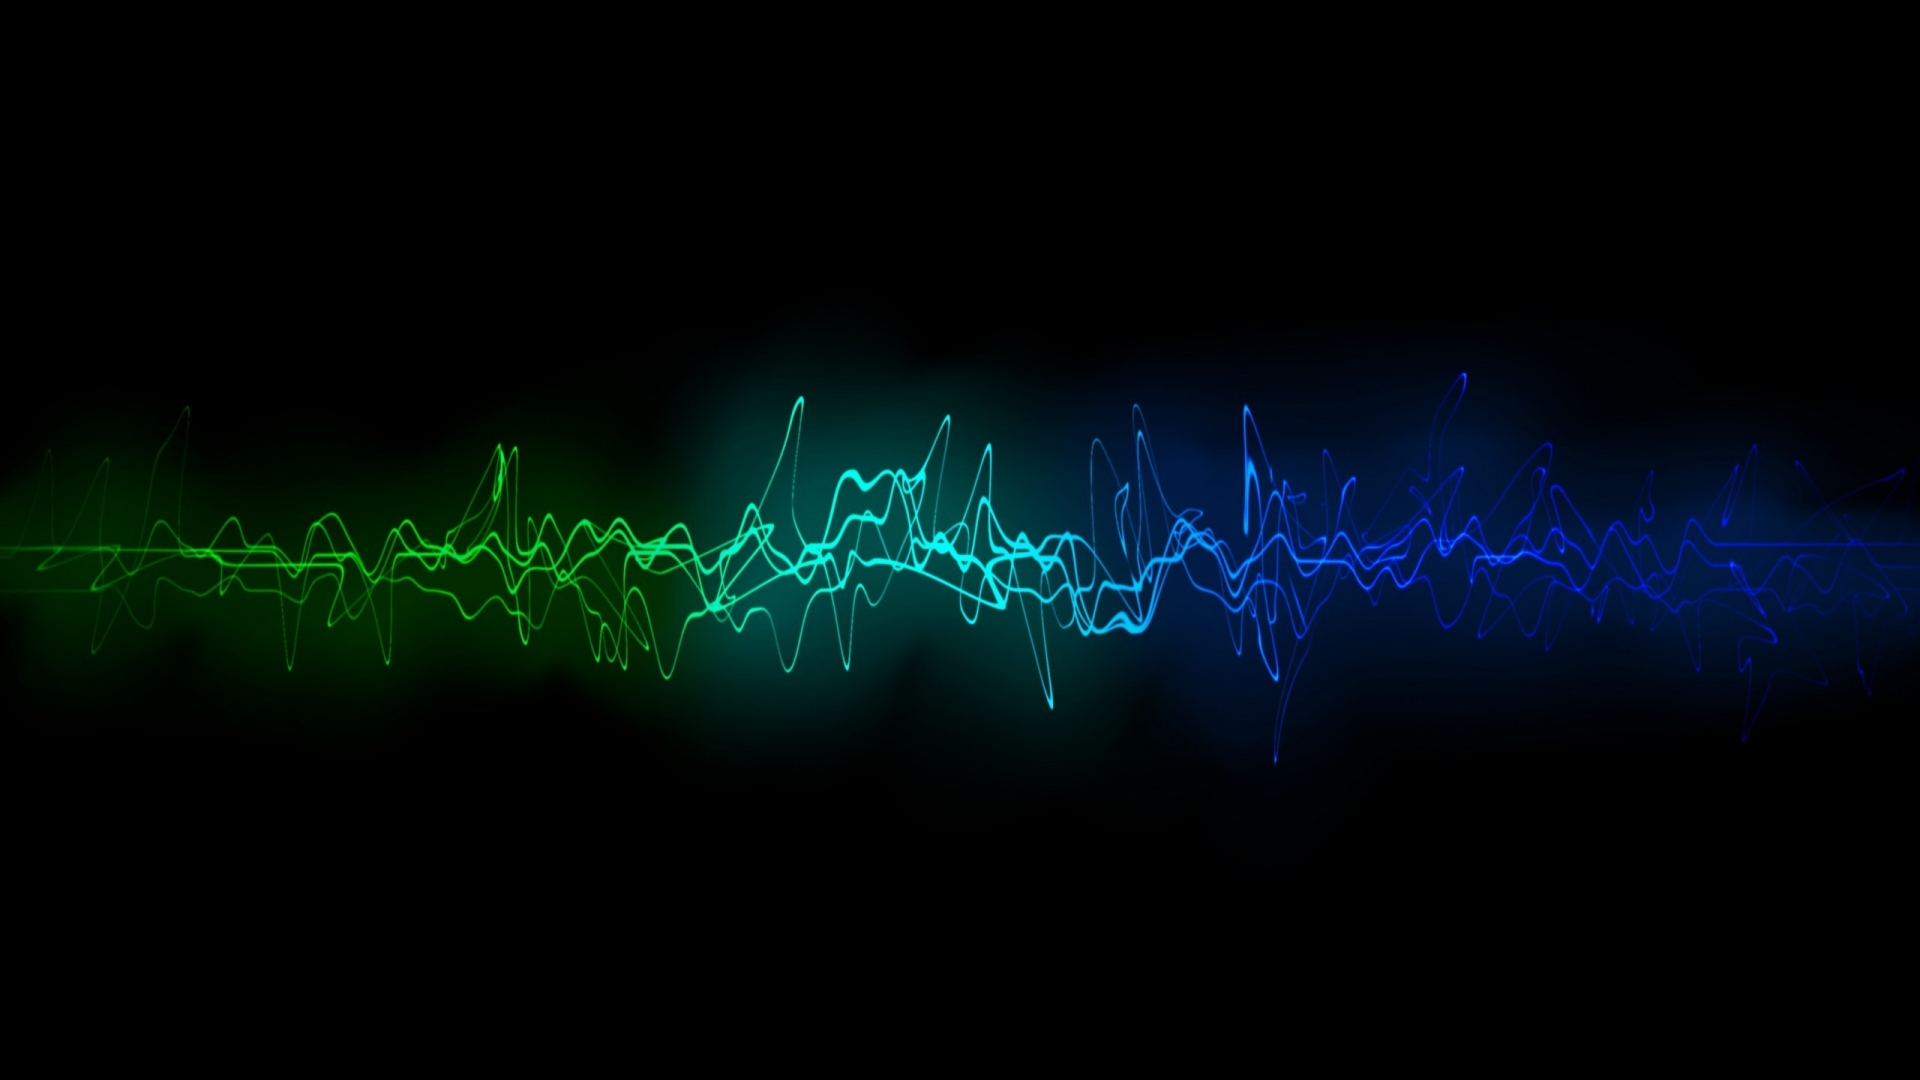 Cool Sound Waves for 1920 x 1080 HDTV 1080p resolution